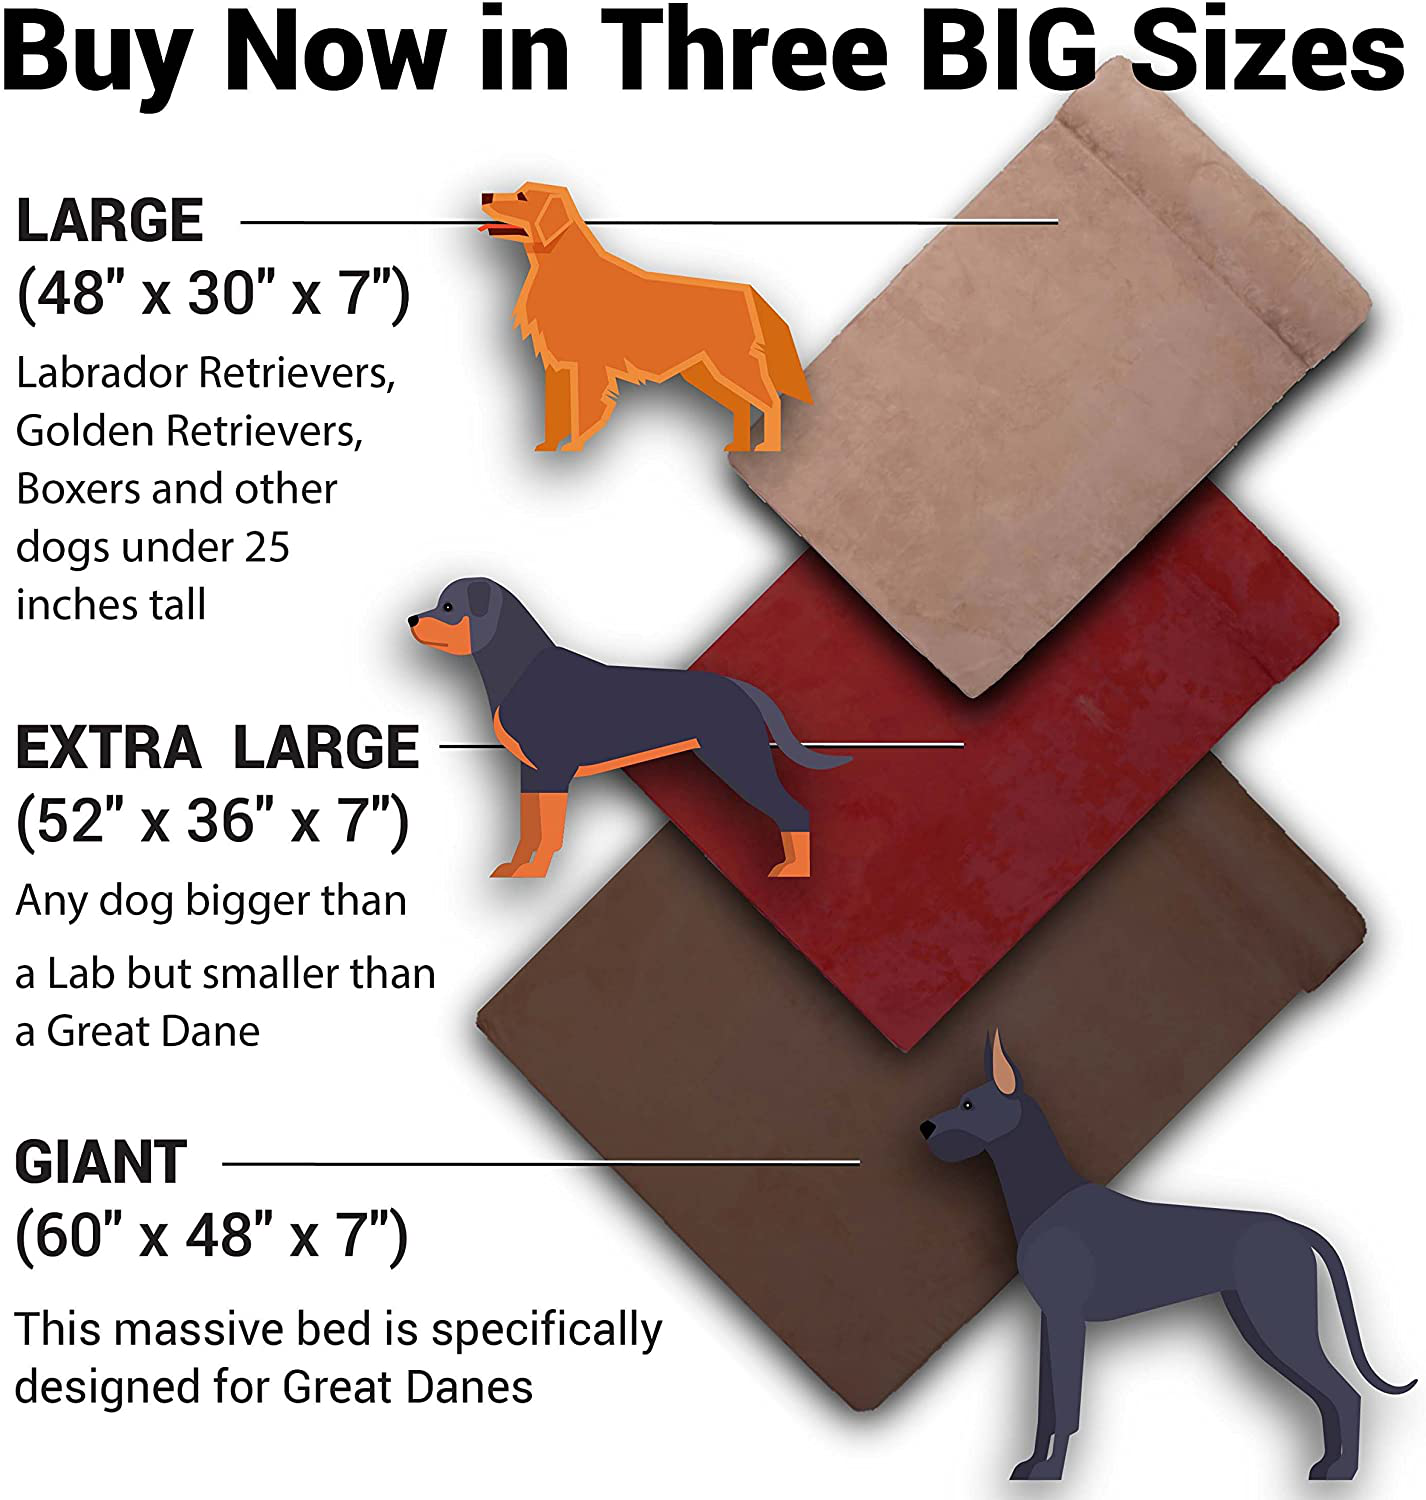 Big Barker 7" Pillow Top Orthopedic Dog Bed for Large and Extra Large Breed Dogs (Headrest Edition)